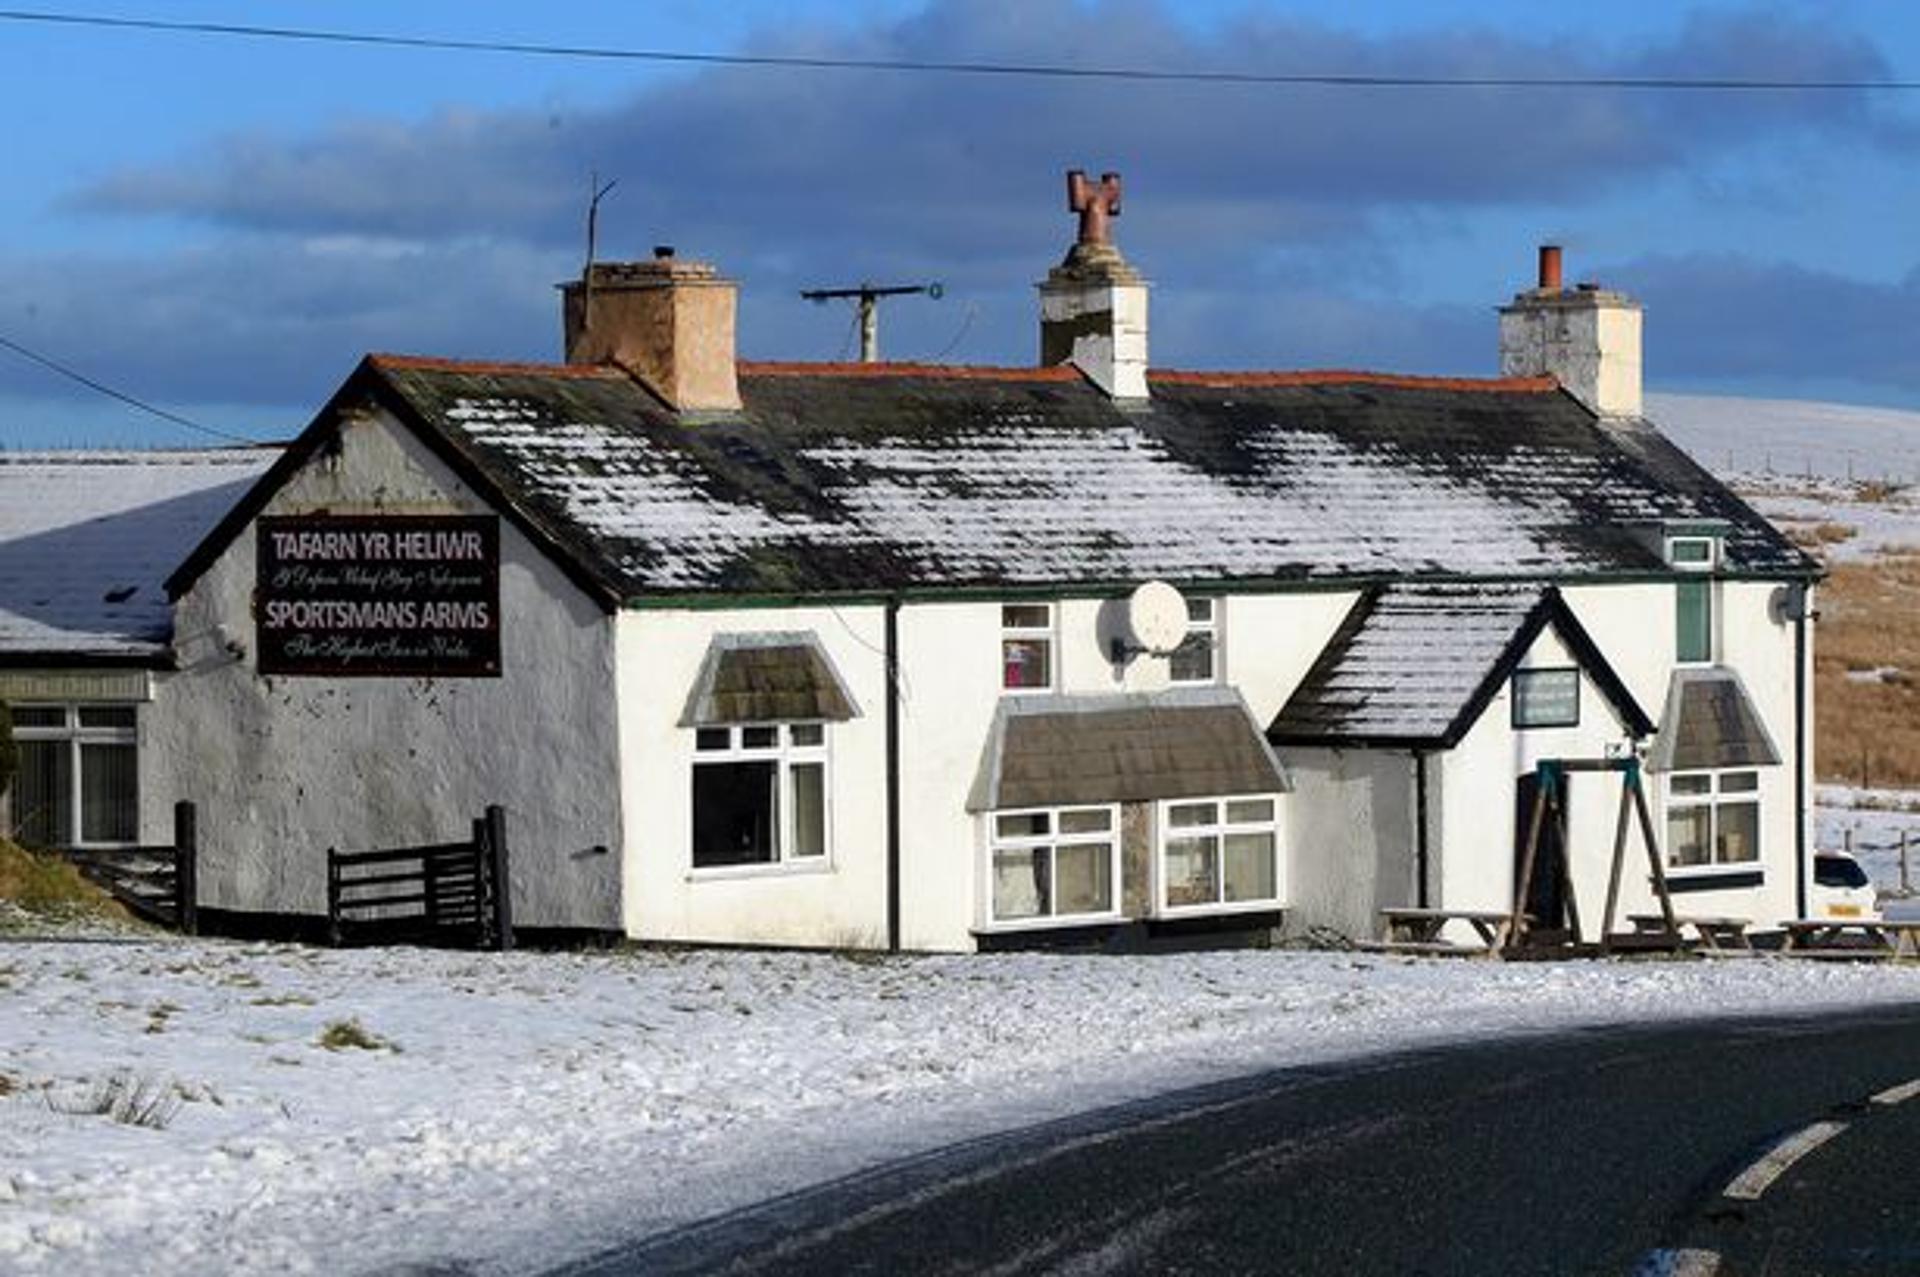 “Highest pub in Wales” up for sale for £600k